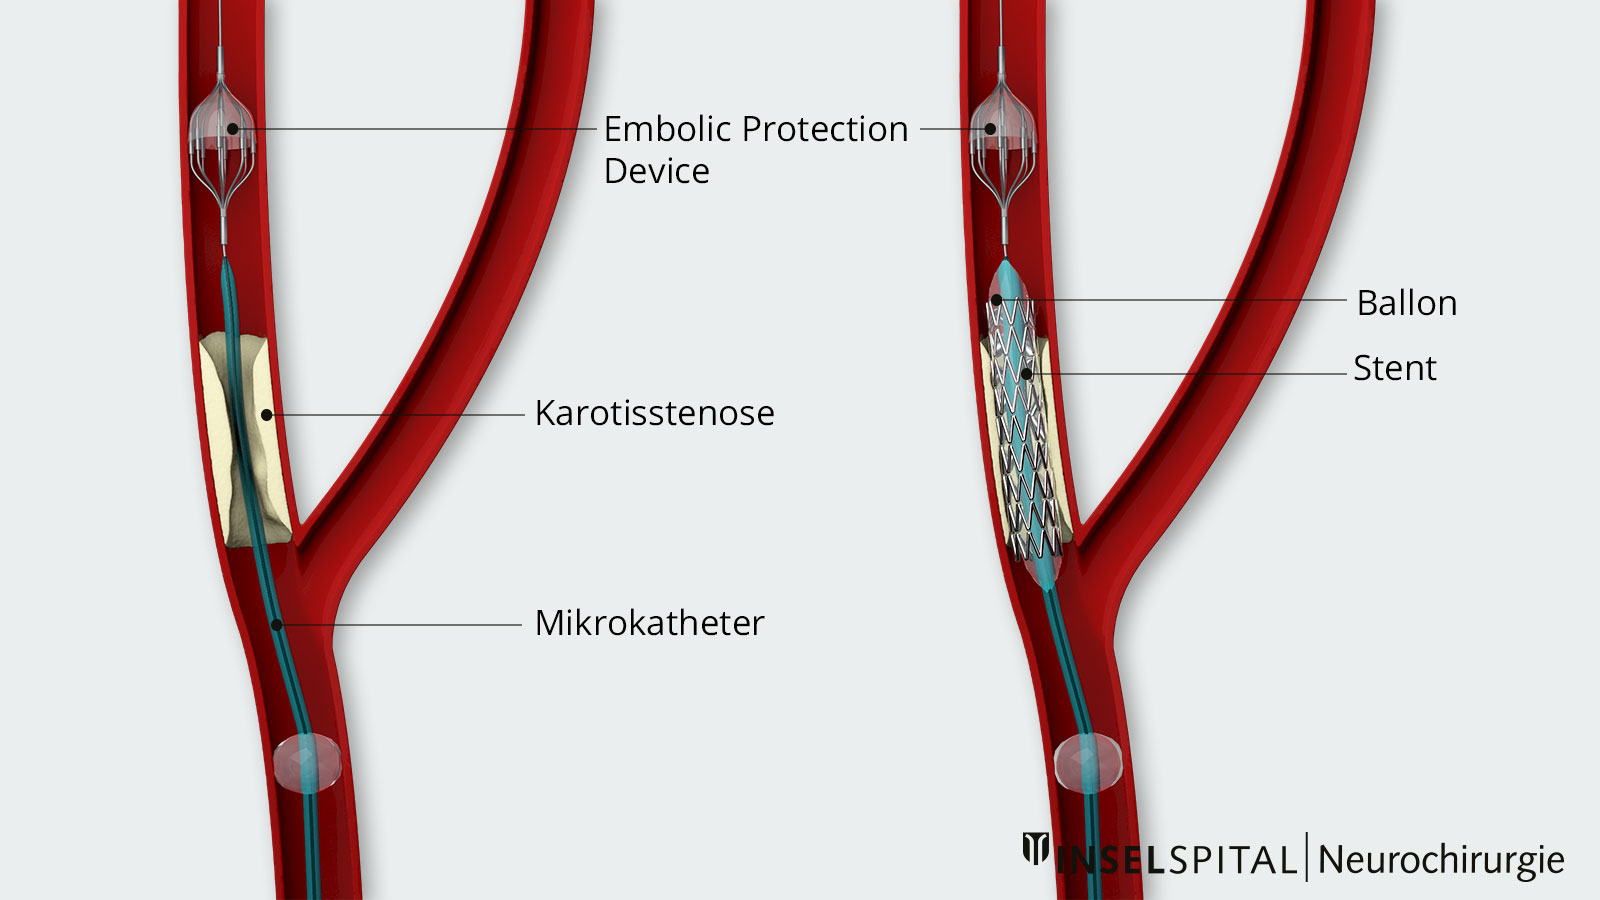 Drawing of a stent dilatation. Left, deployed EPD (Embolic Protection Device); right, stent placement and balloon dilatation.